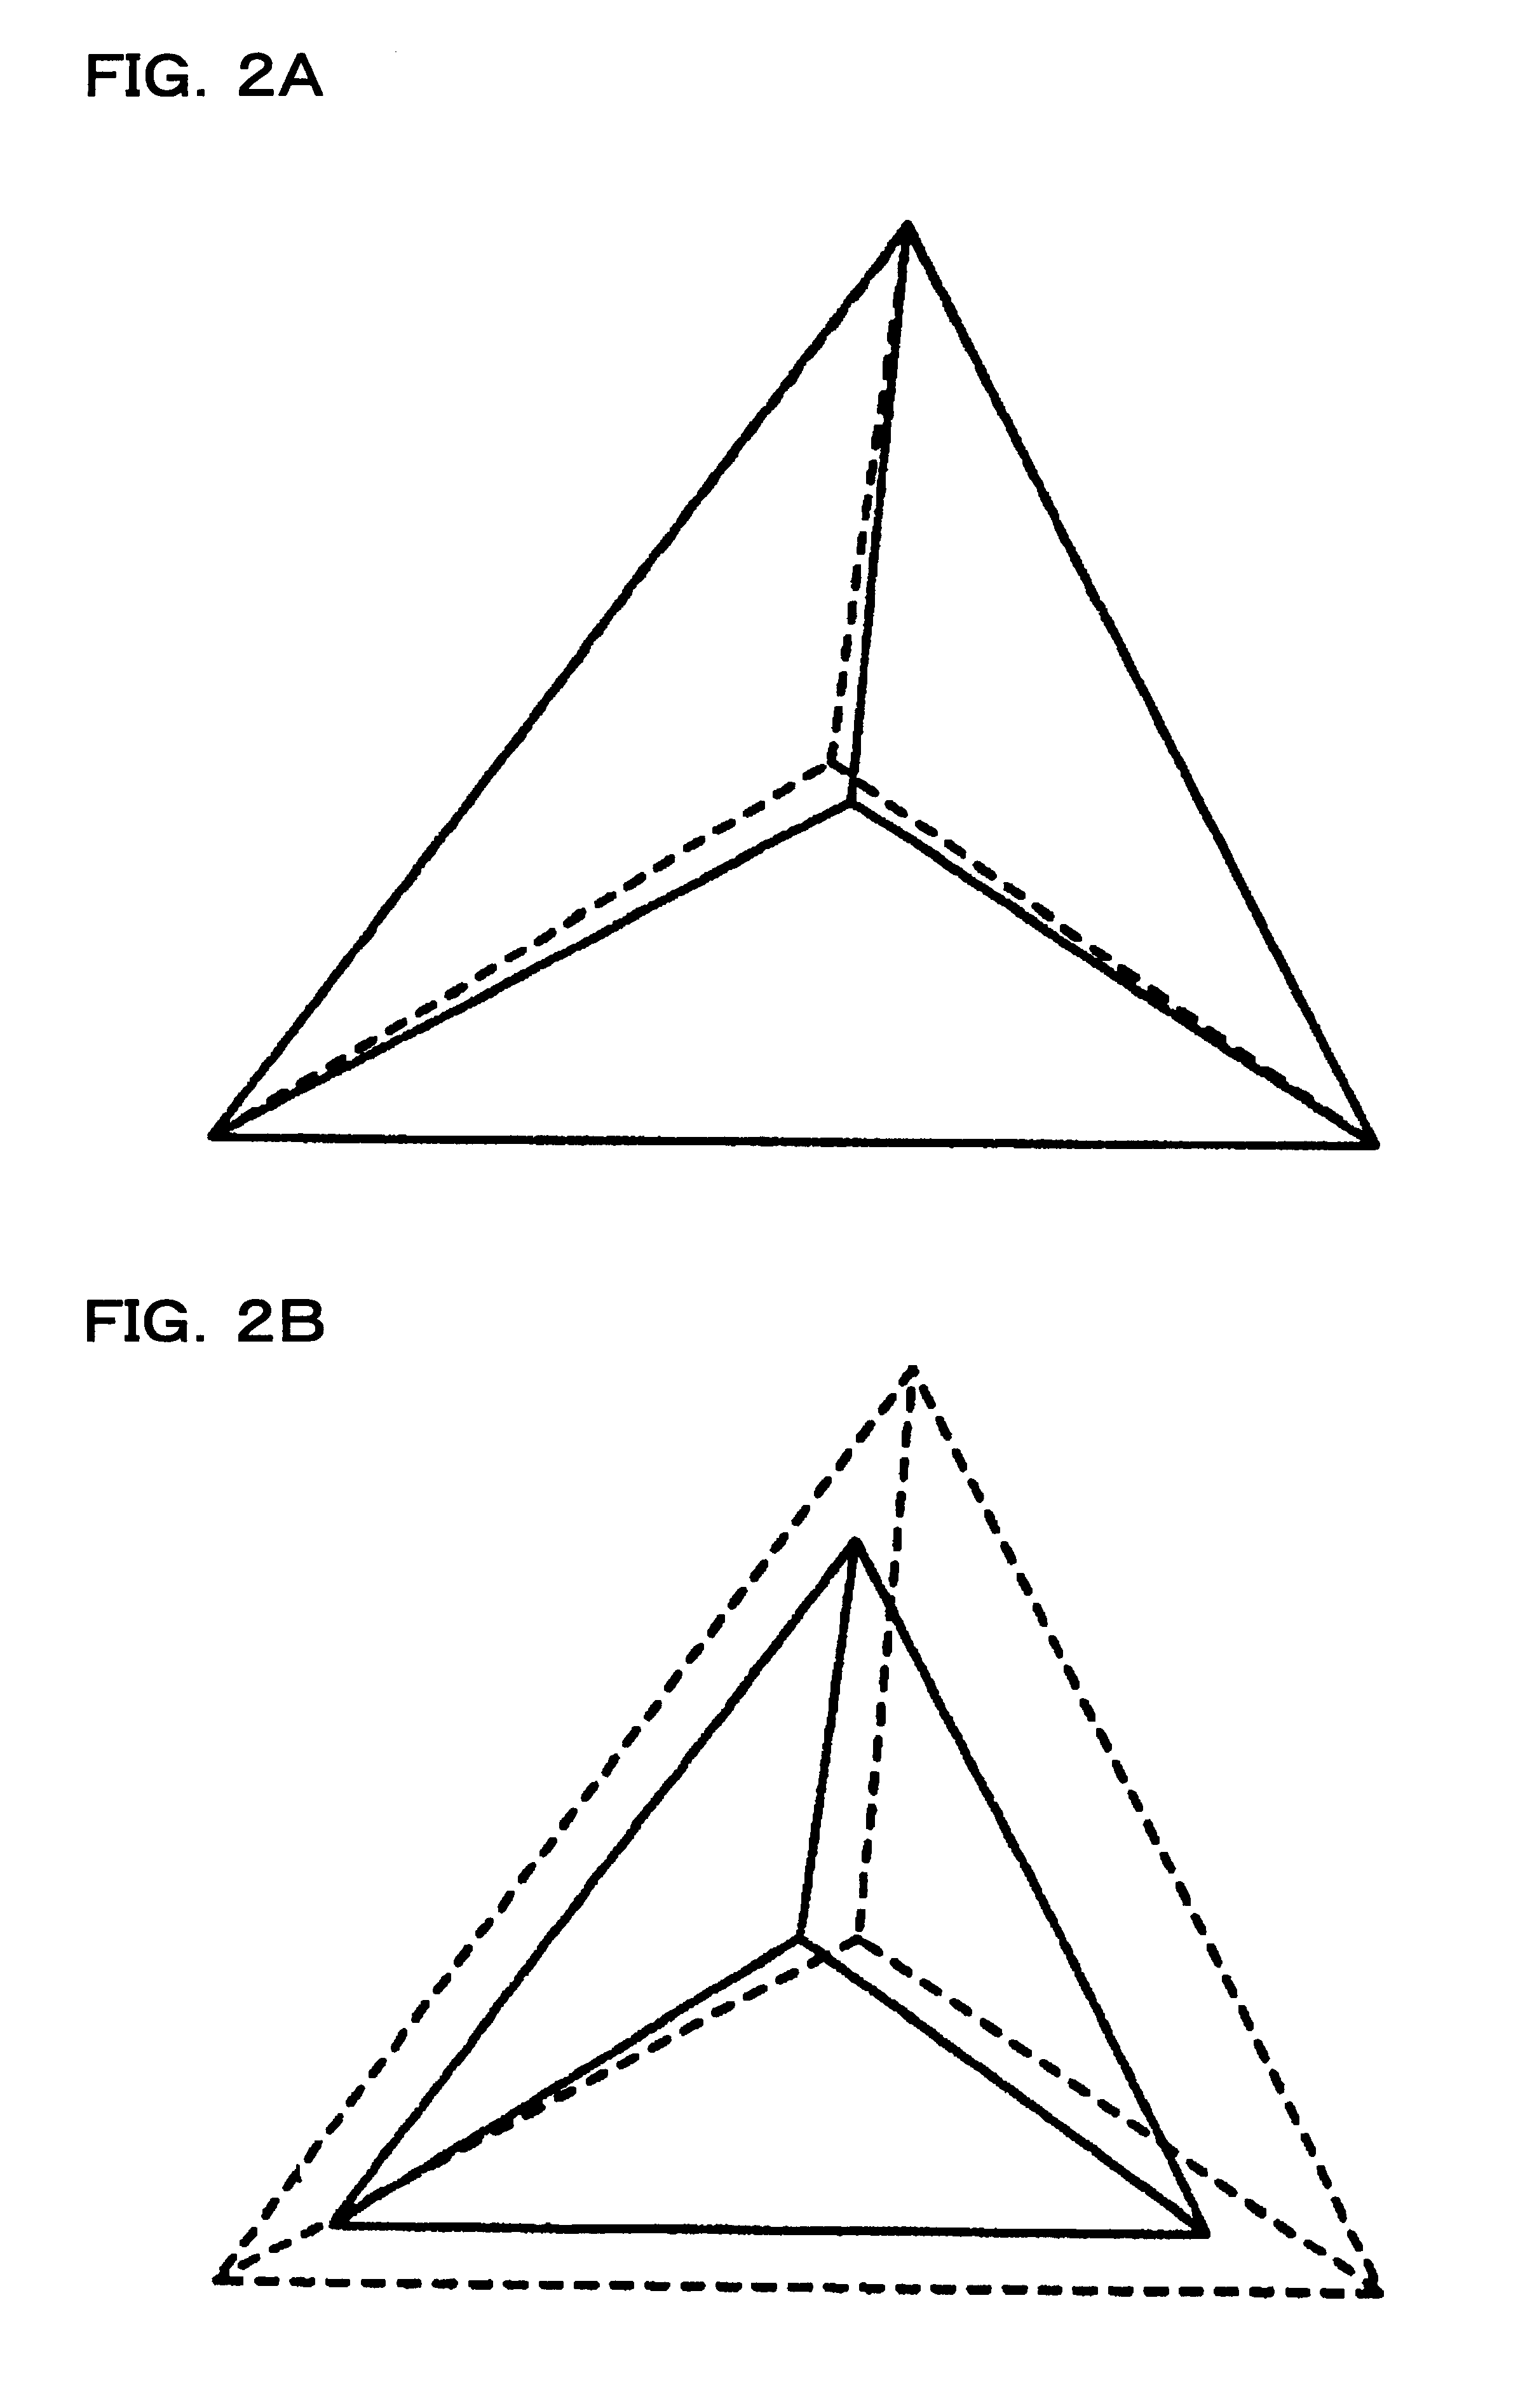 Image display system, image processing method, and program